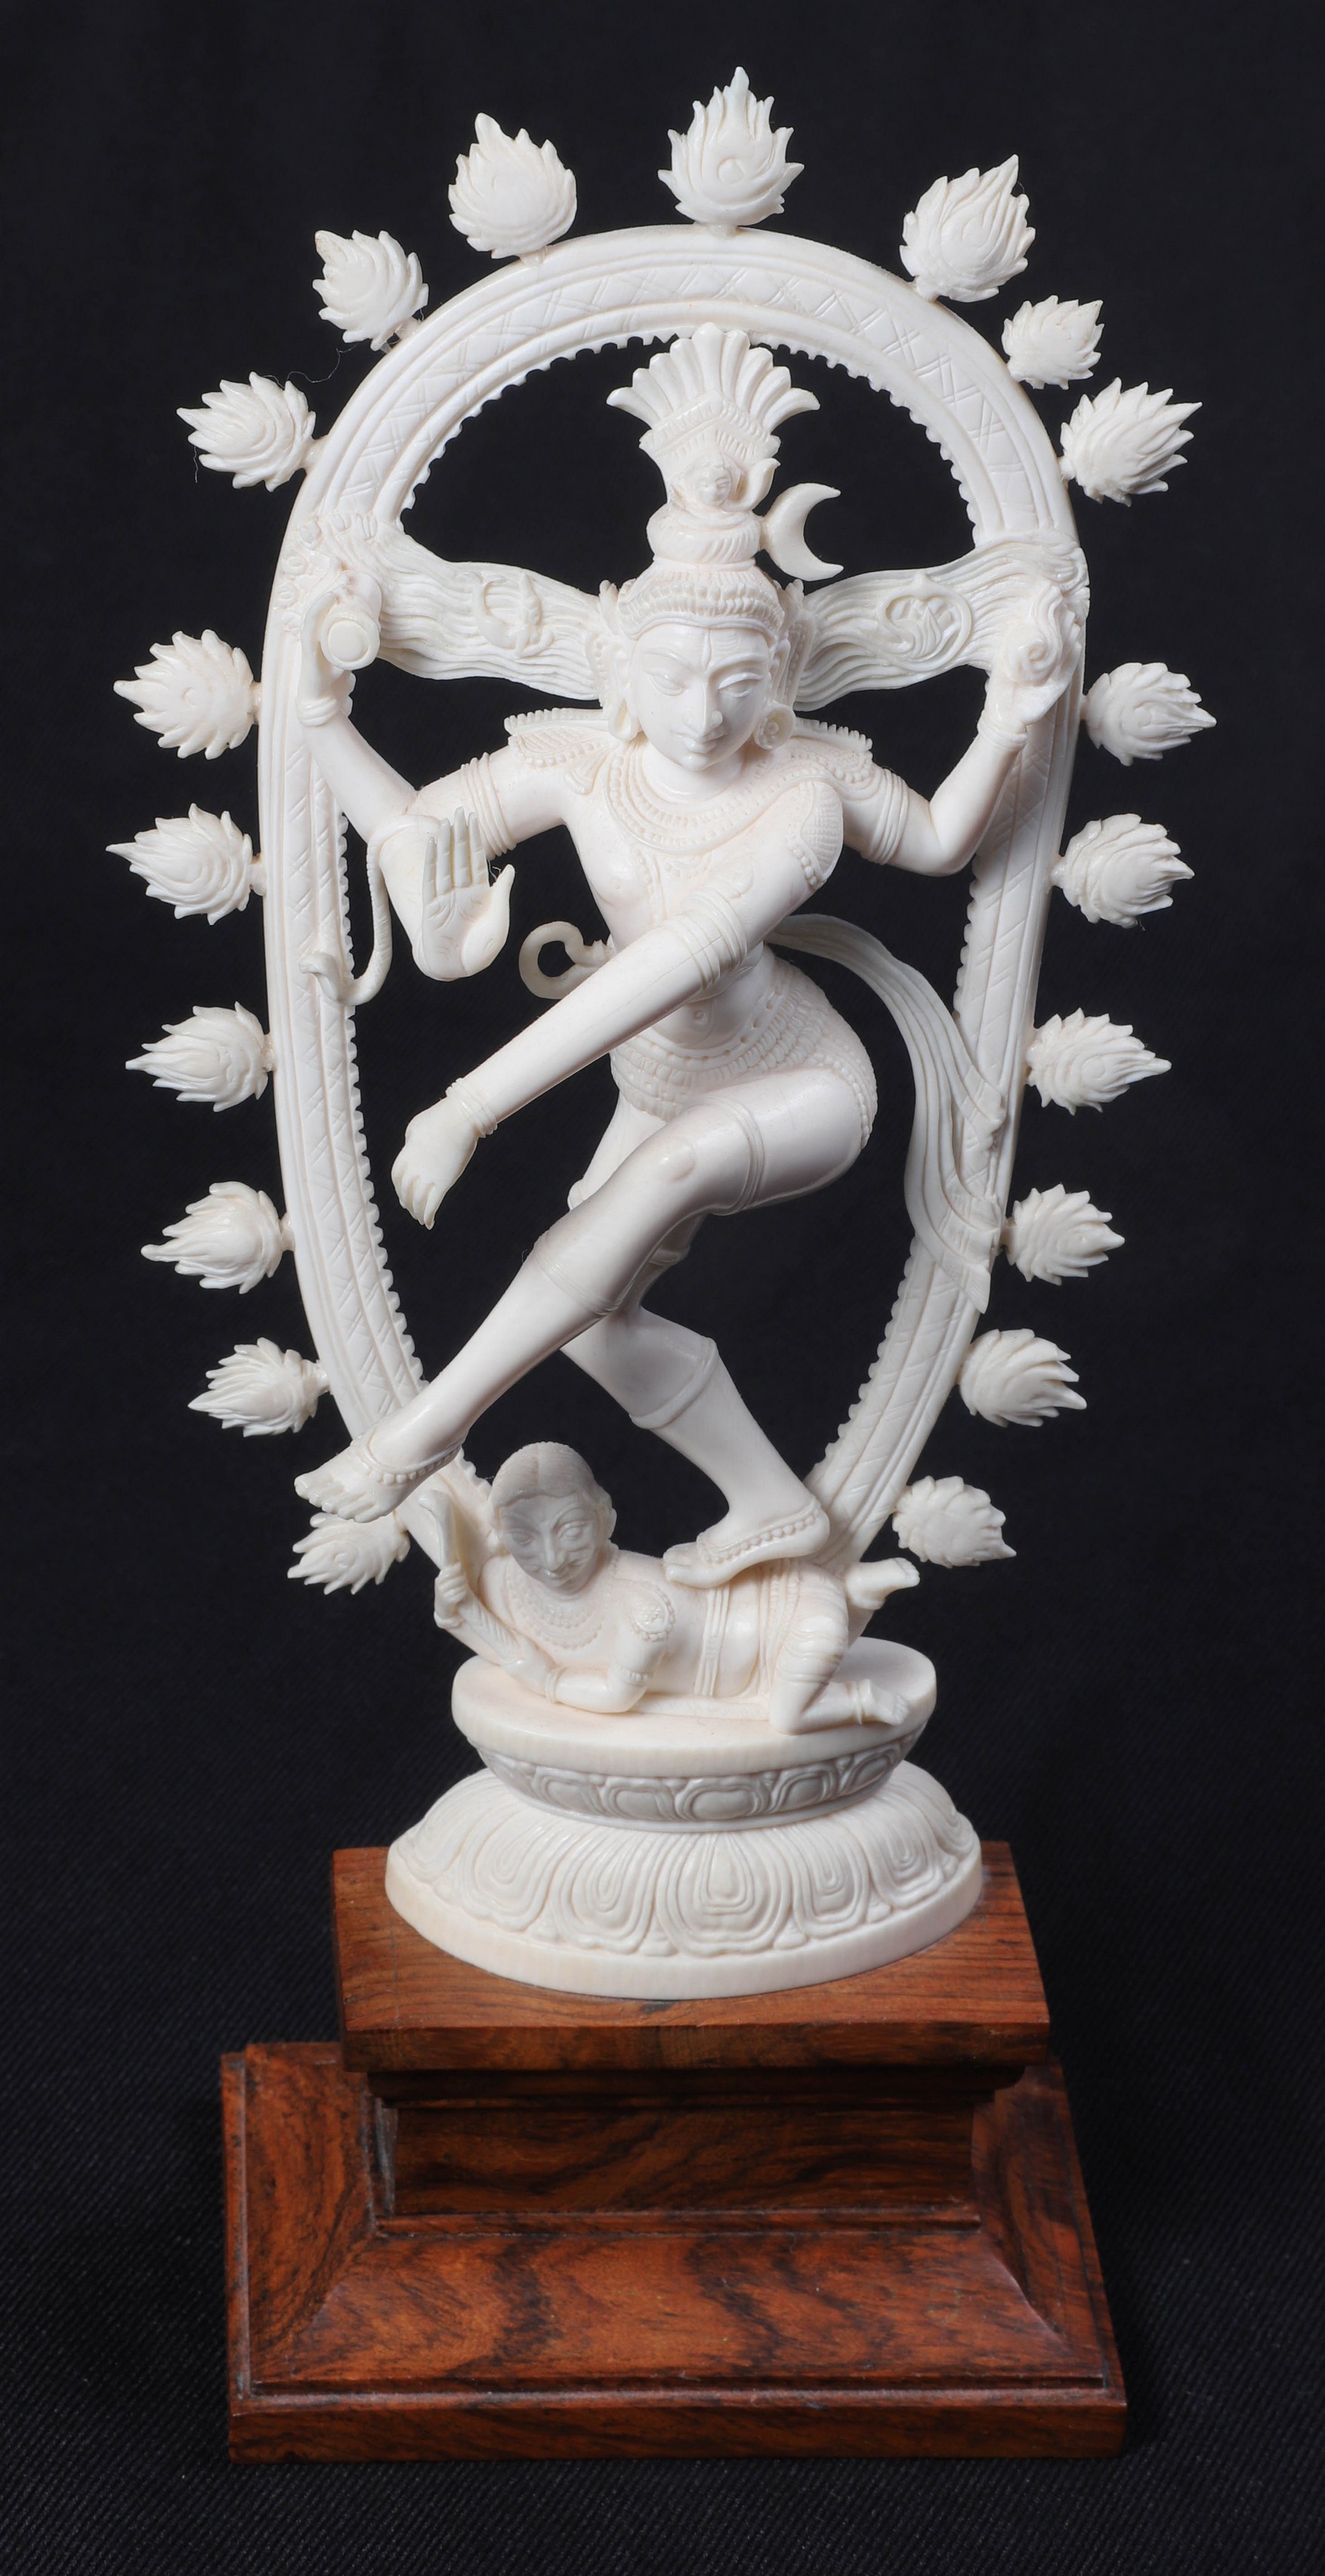 An Ivory Carving of Lord Nataraja  2e0d1f